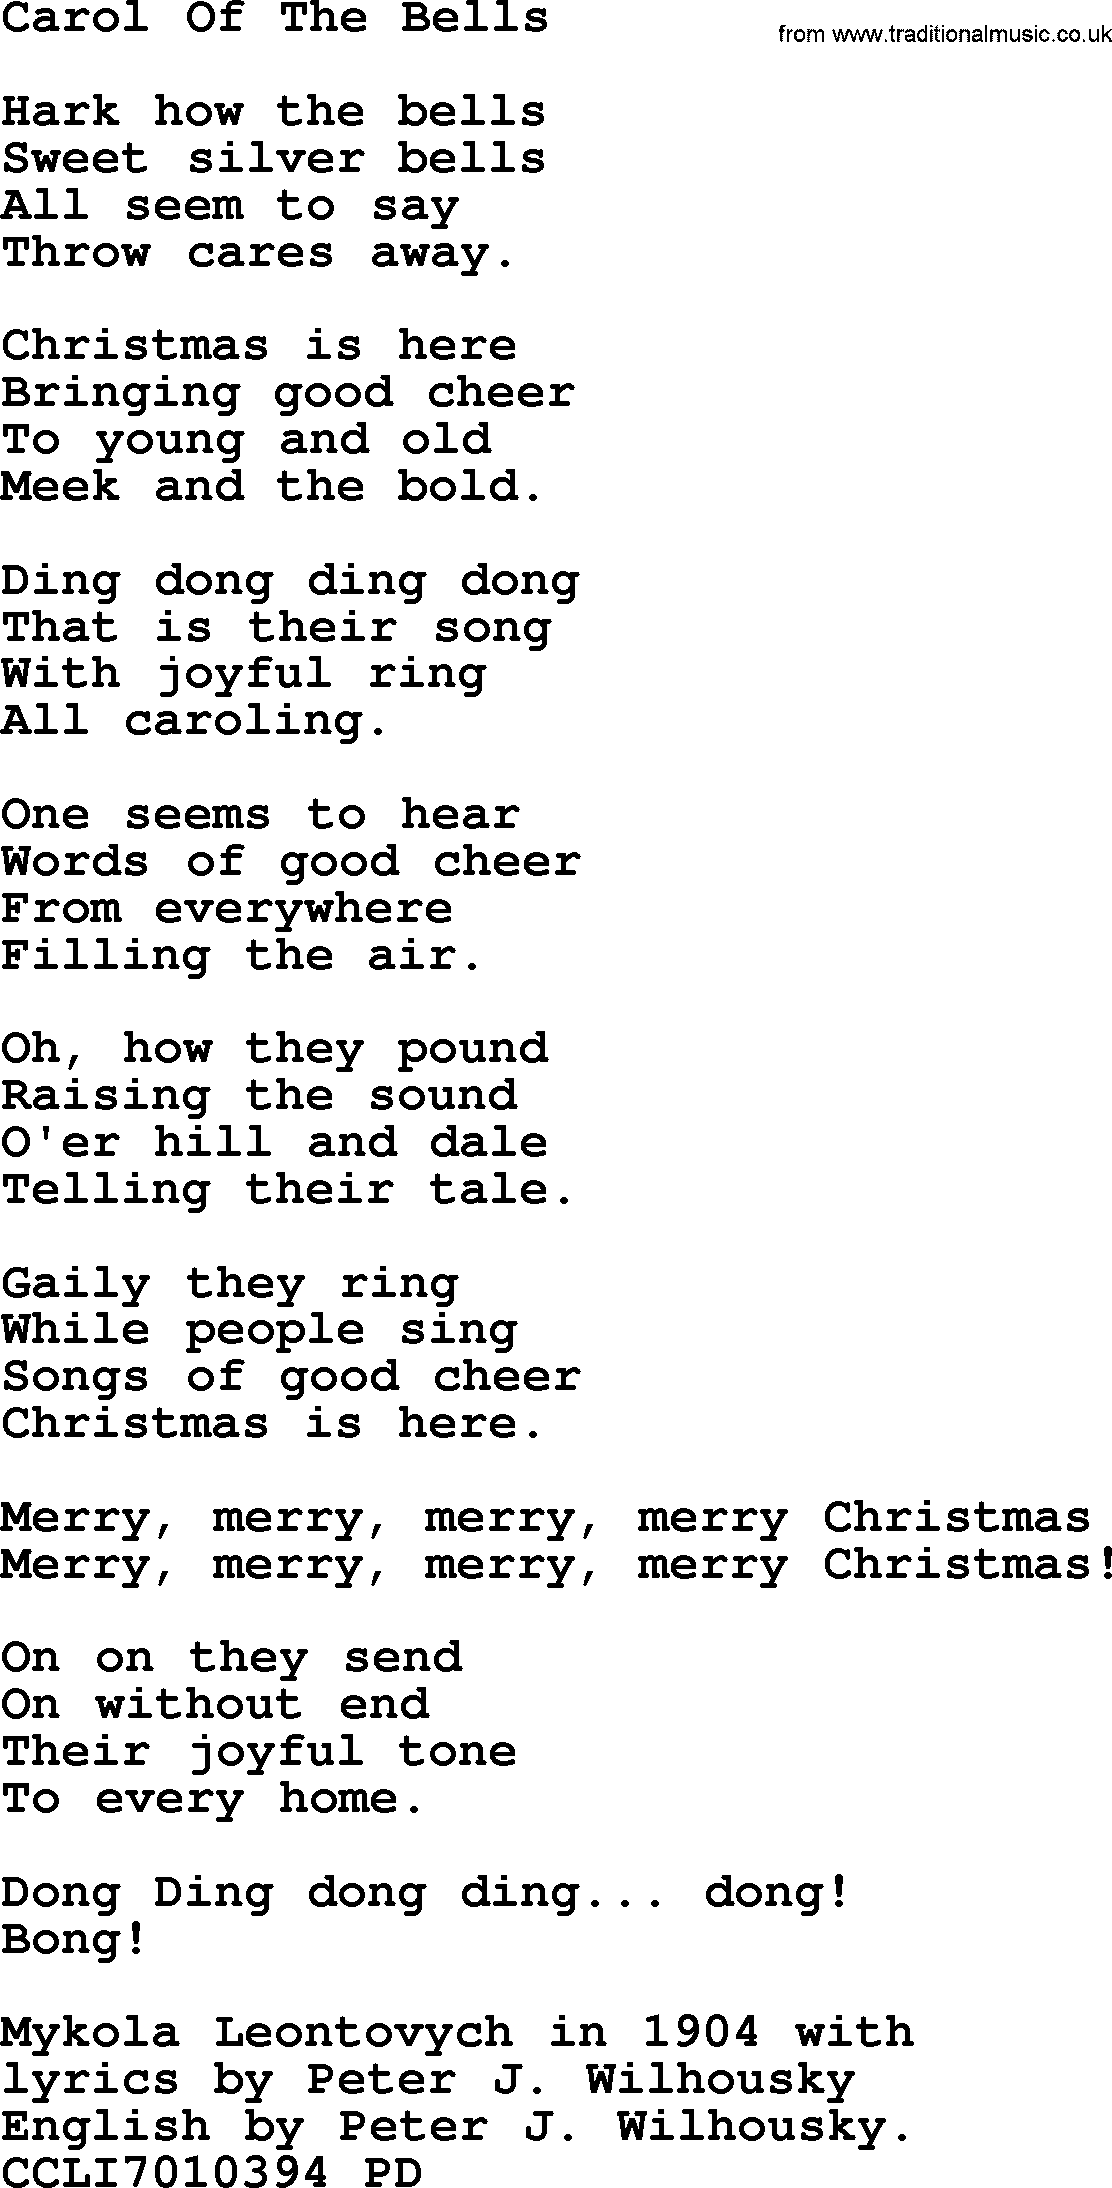 Christmas Powerpoints, Song: Carol Of The Bells - Lyrics, PPT(for church projection etc) and PDF